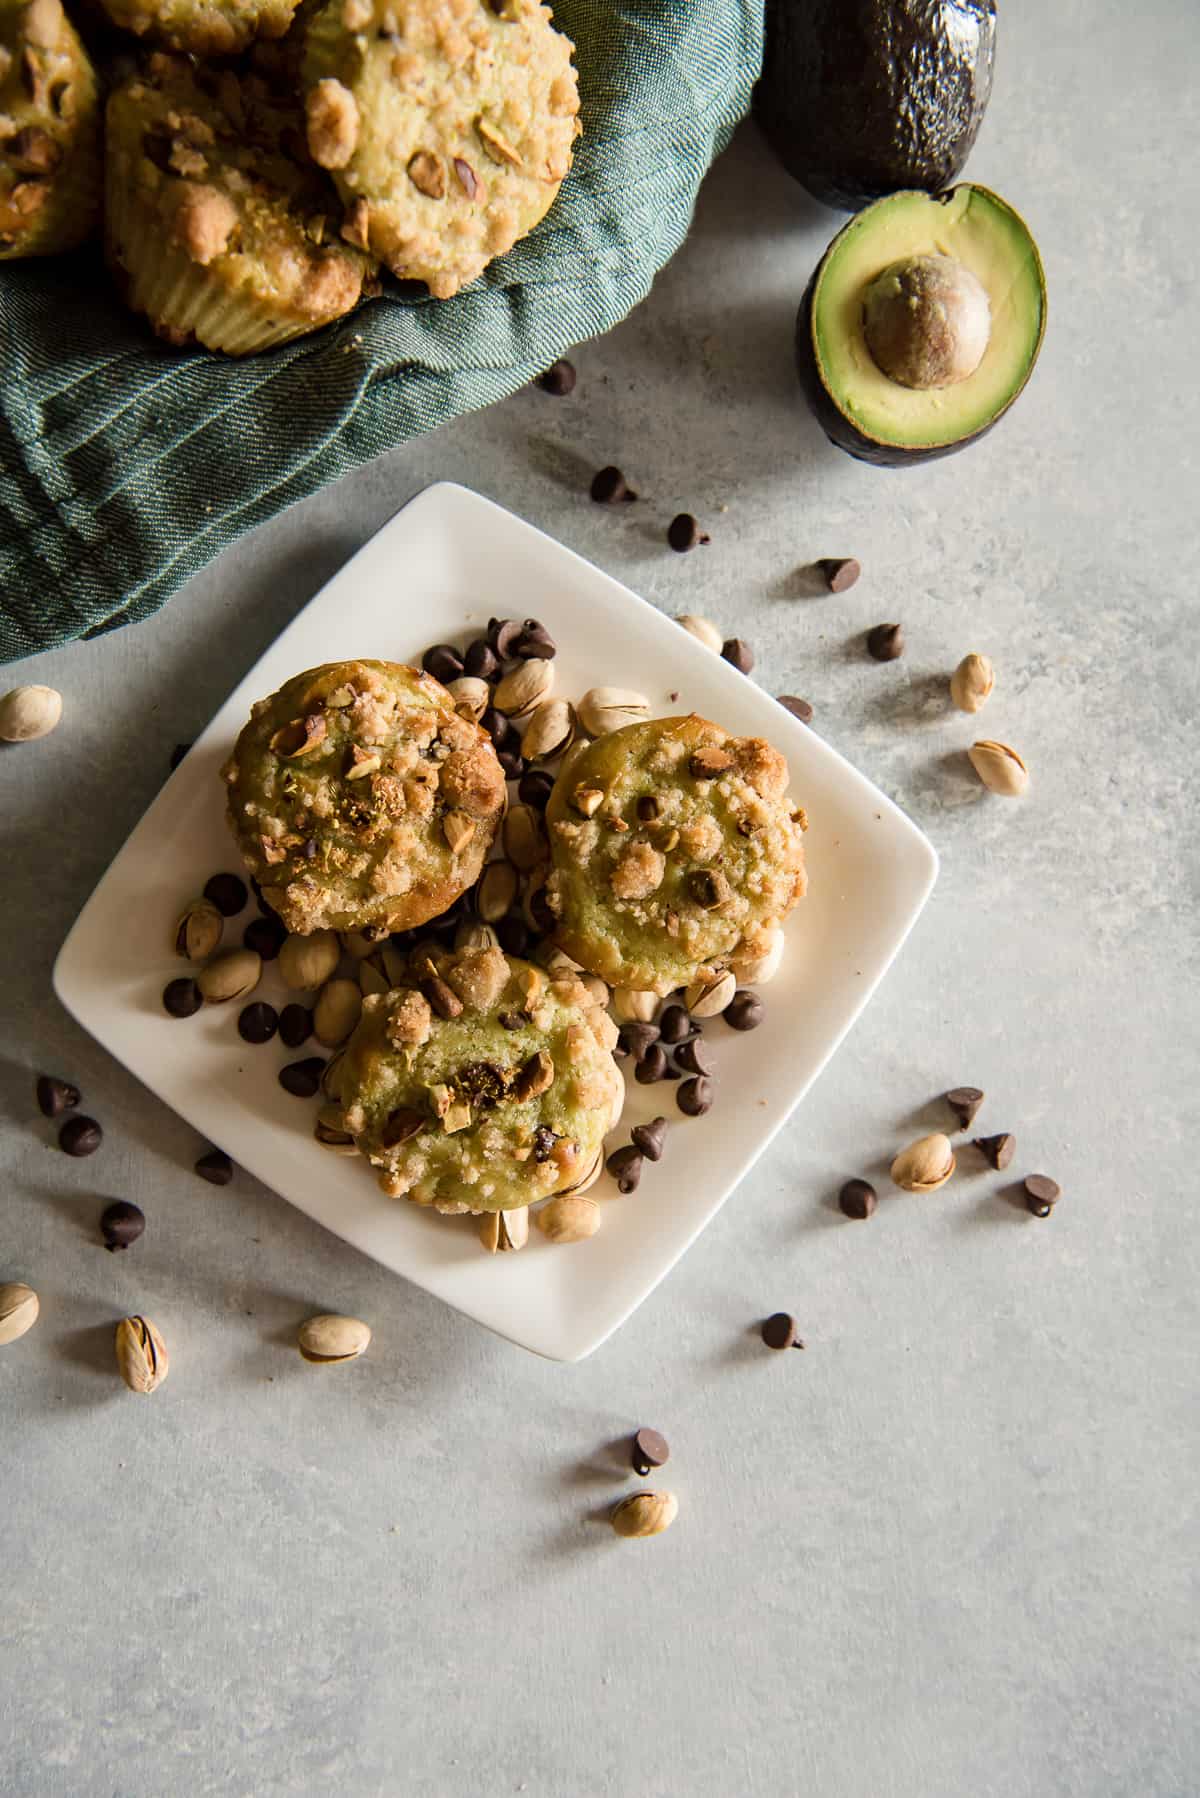 Avocado chocolate chip muffins with pistachios and avocados on a plate.